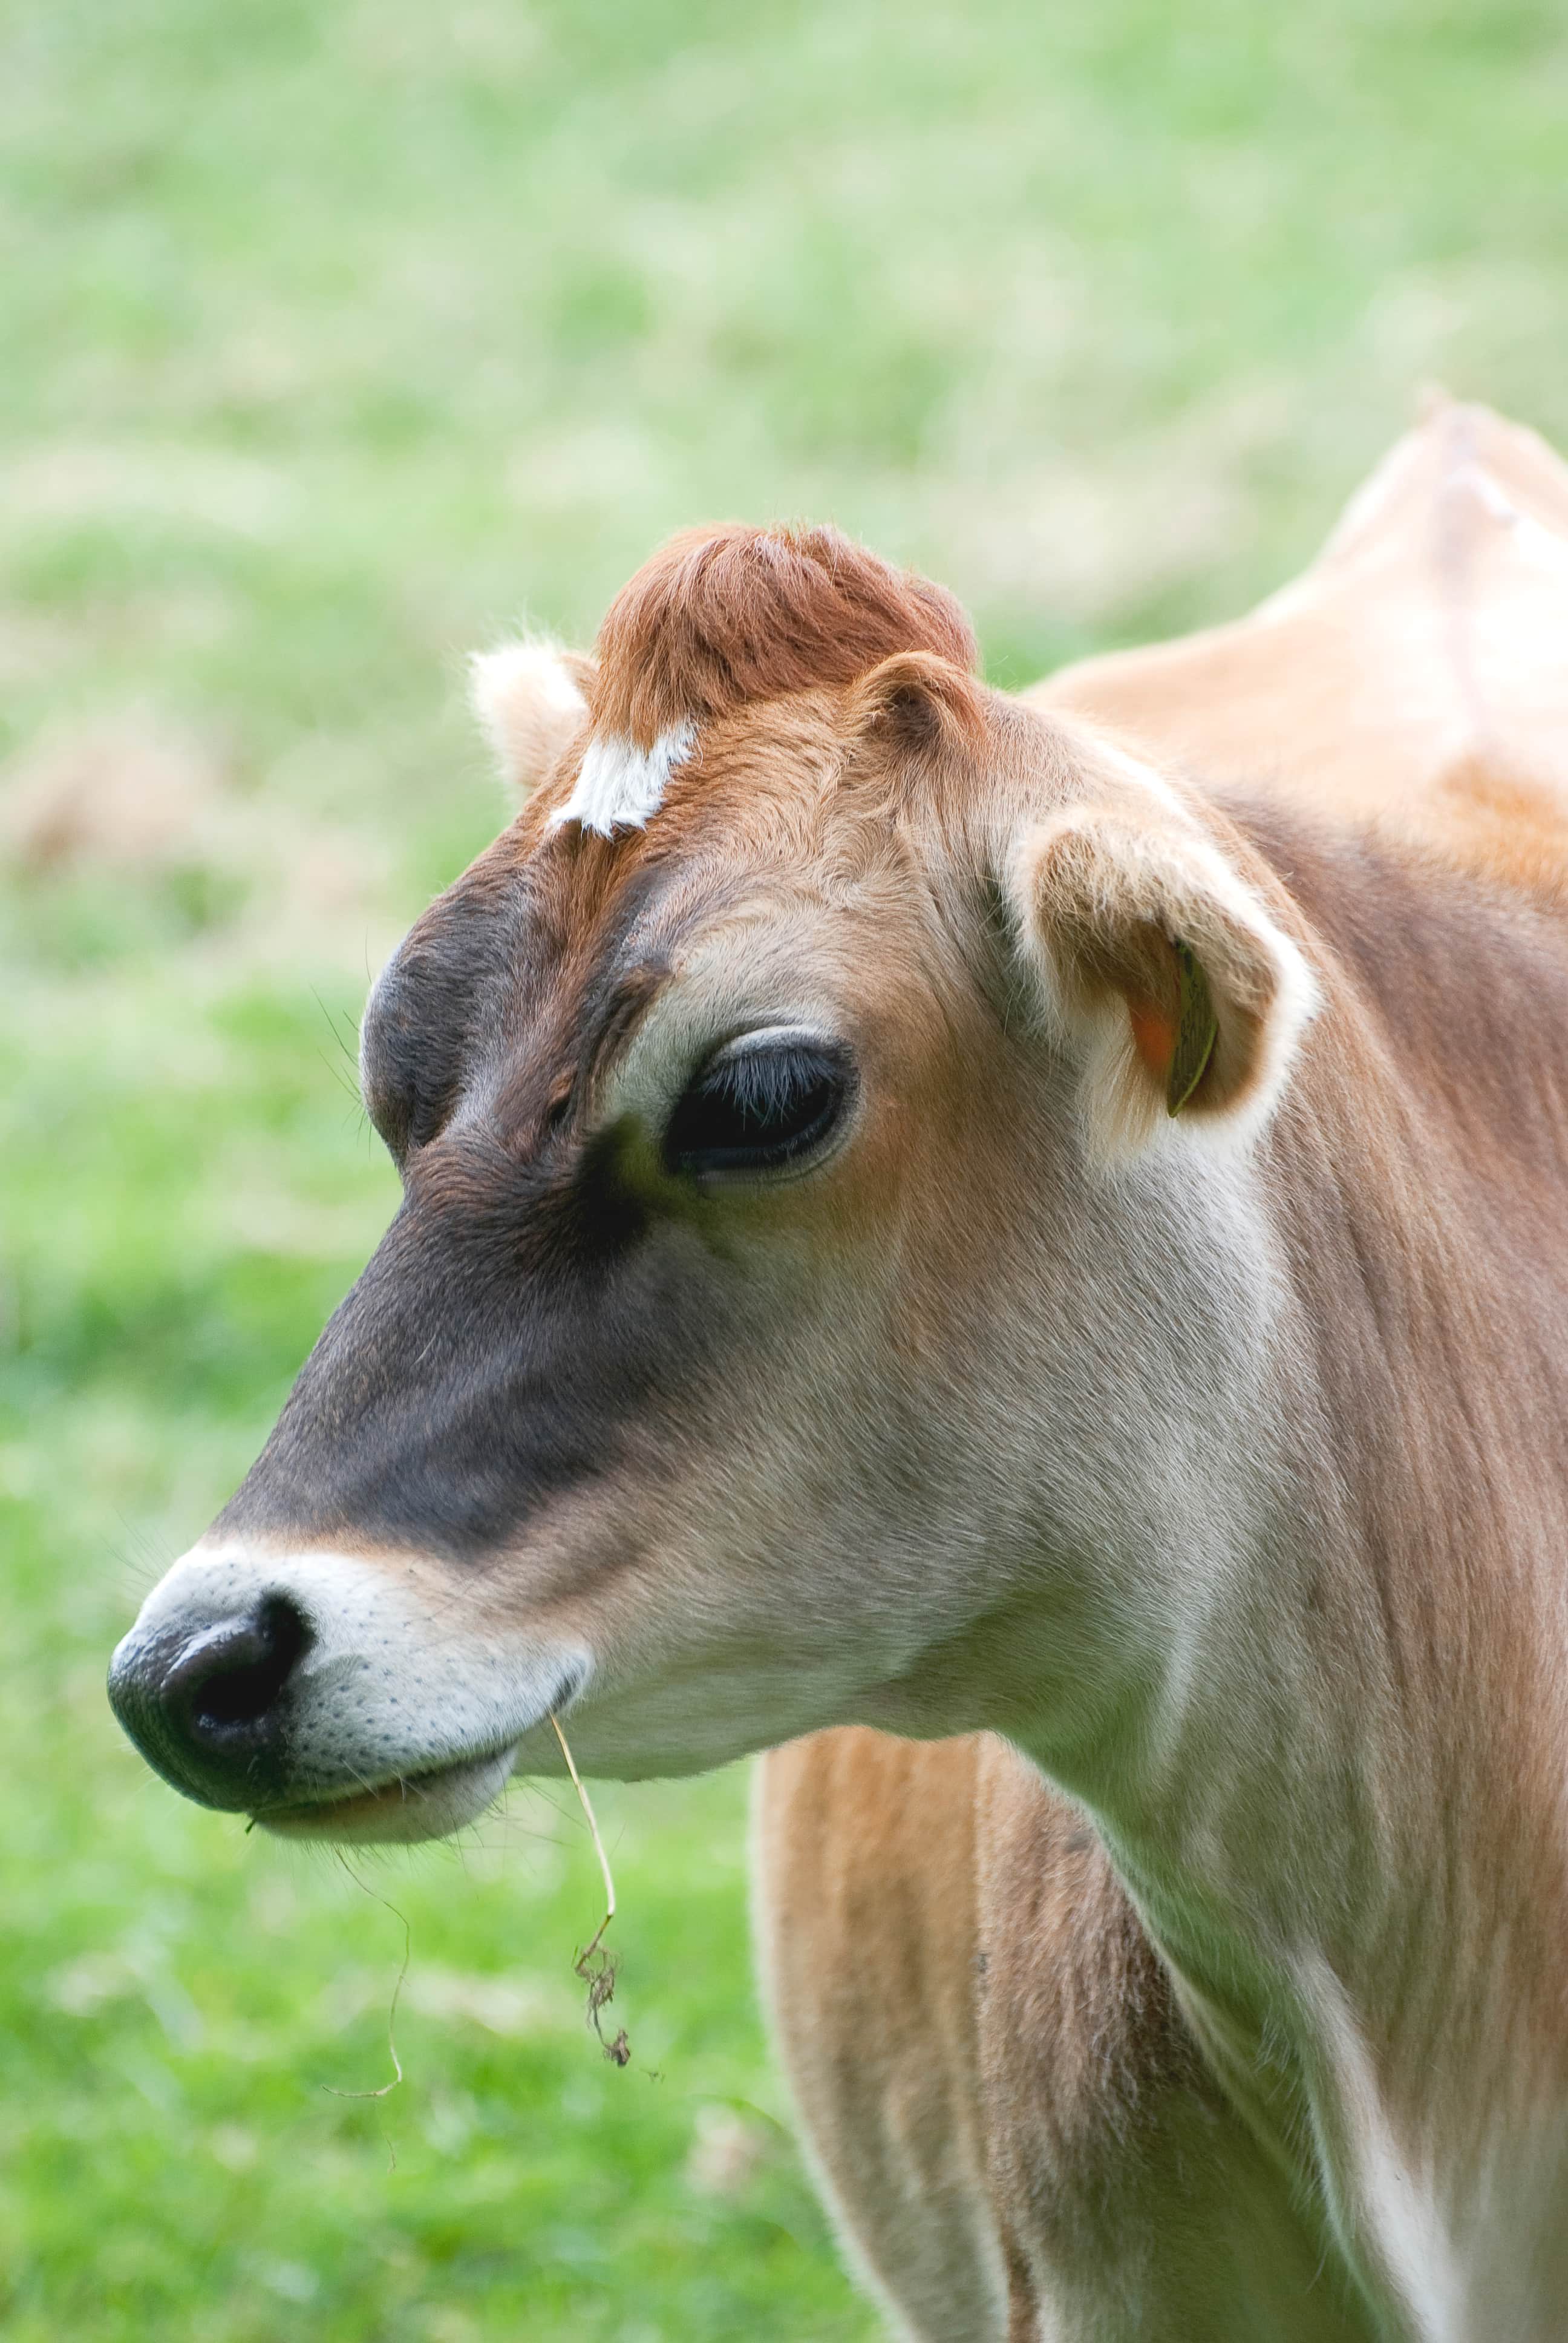 Jersey cows are made of a smaller build and produce decent quantities of milk.